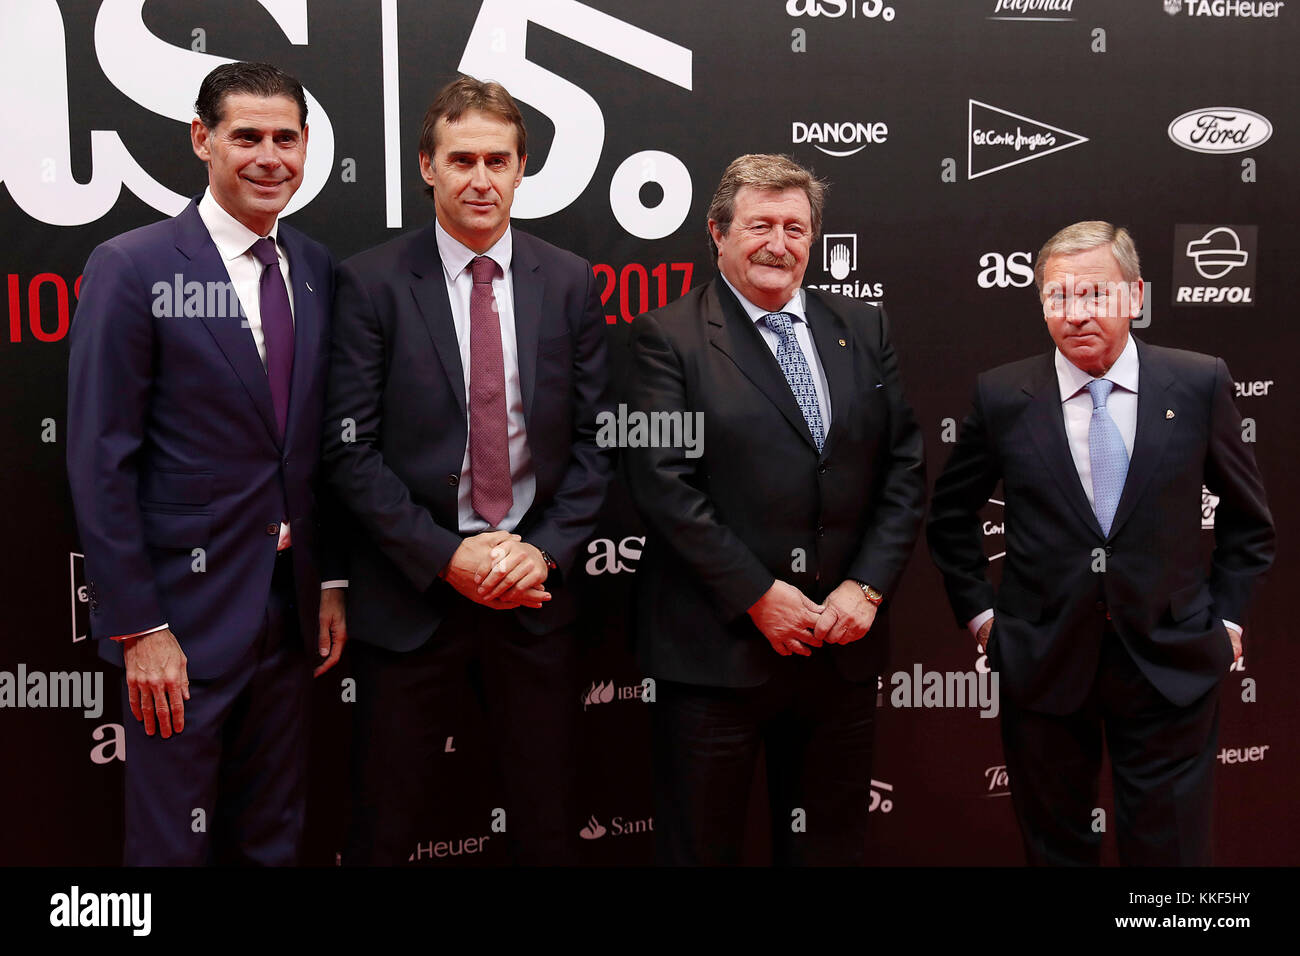 Madrid, Spain. 4th Dec, 2017. Fernando Hierro, Julen Lopetegui and Javier Clemente During the AS Sports Awards in its 50th Anniversary in Madrid on Monday 04 December 2017., Credit: Gtres Información más Comuniación on line, S.L./Alamy Live News Stock Photo